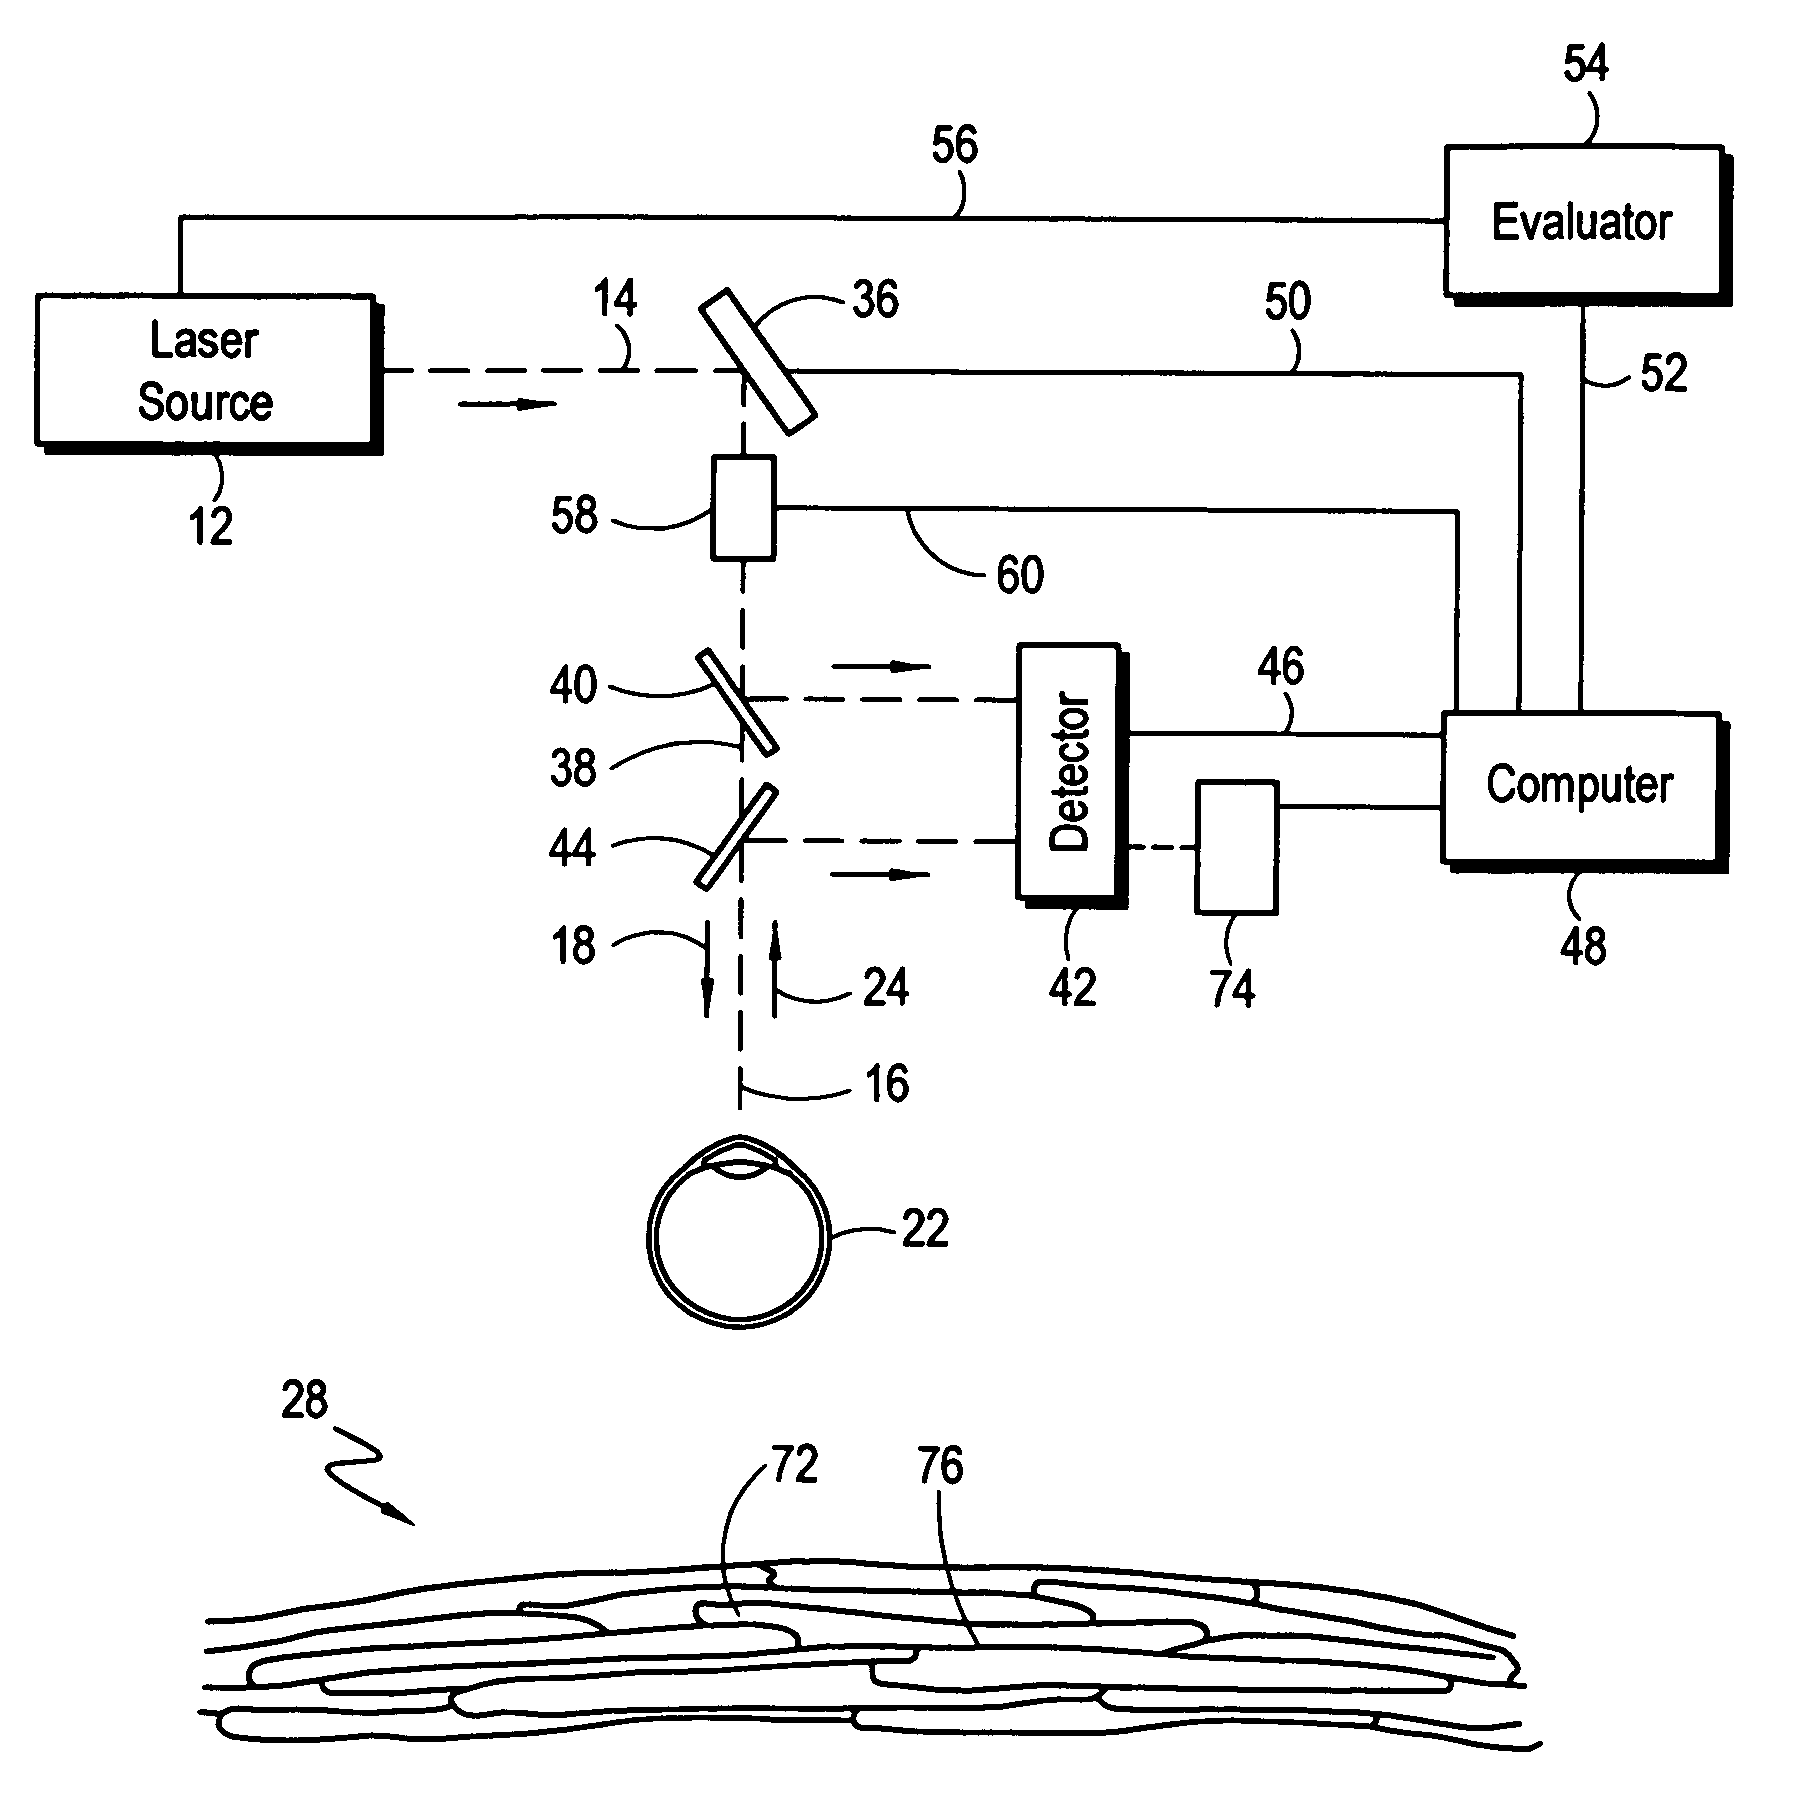 Method and apparatus for intrastromal refractive surgery